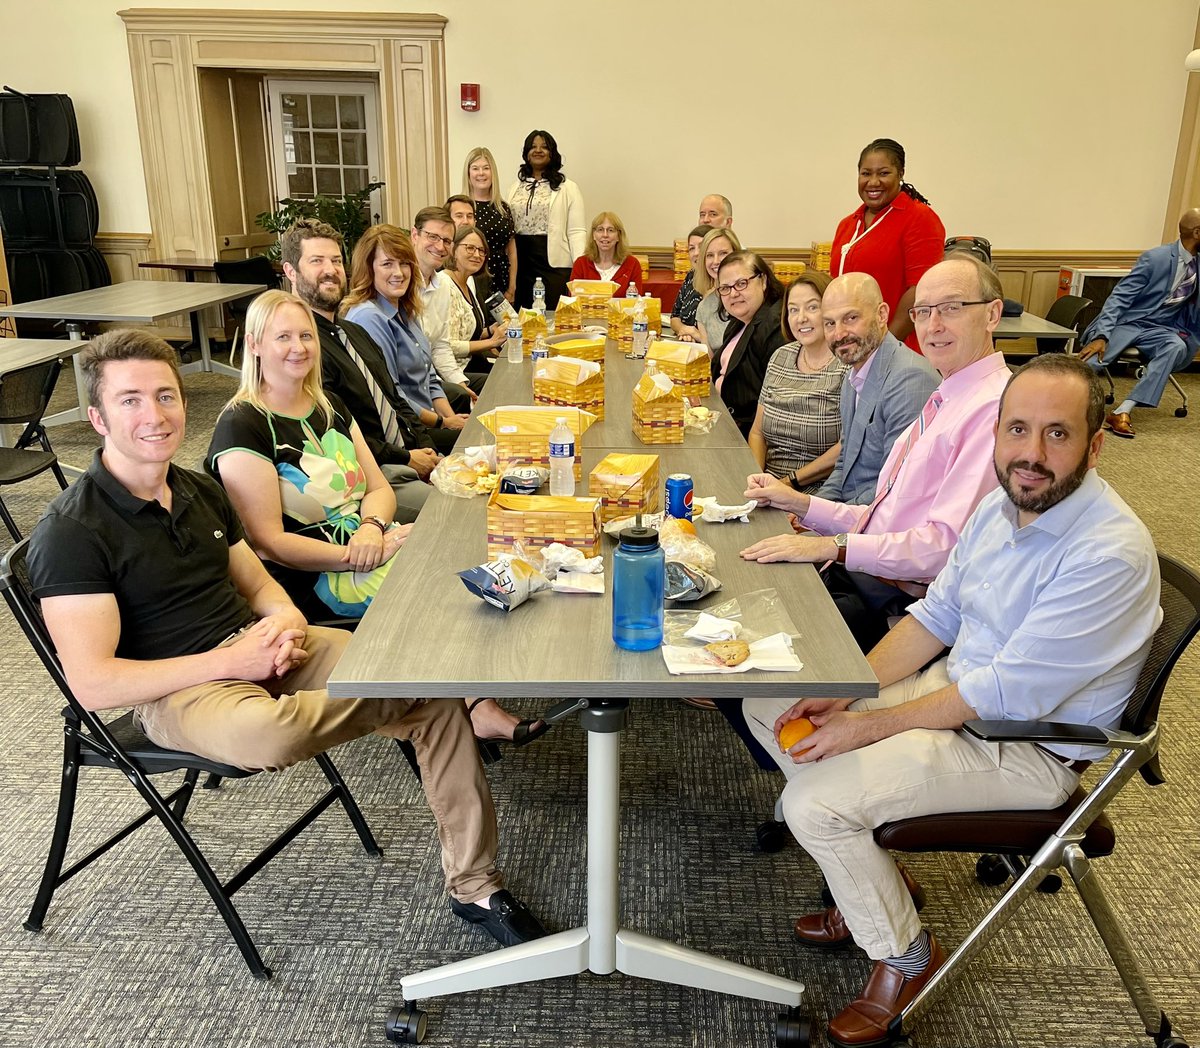 We kicked off the school year with a luncheon to welcome new faculty! Brenda Carlson and Lisa Woods are Legal Writing Instructors, Noemi Flores is our Scholar-in-Residence, and Bryan Lammon is a Visiting Professor. #niulaw #niulawhasitall #niulawis4you #niulawproud